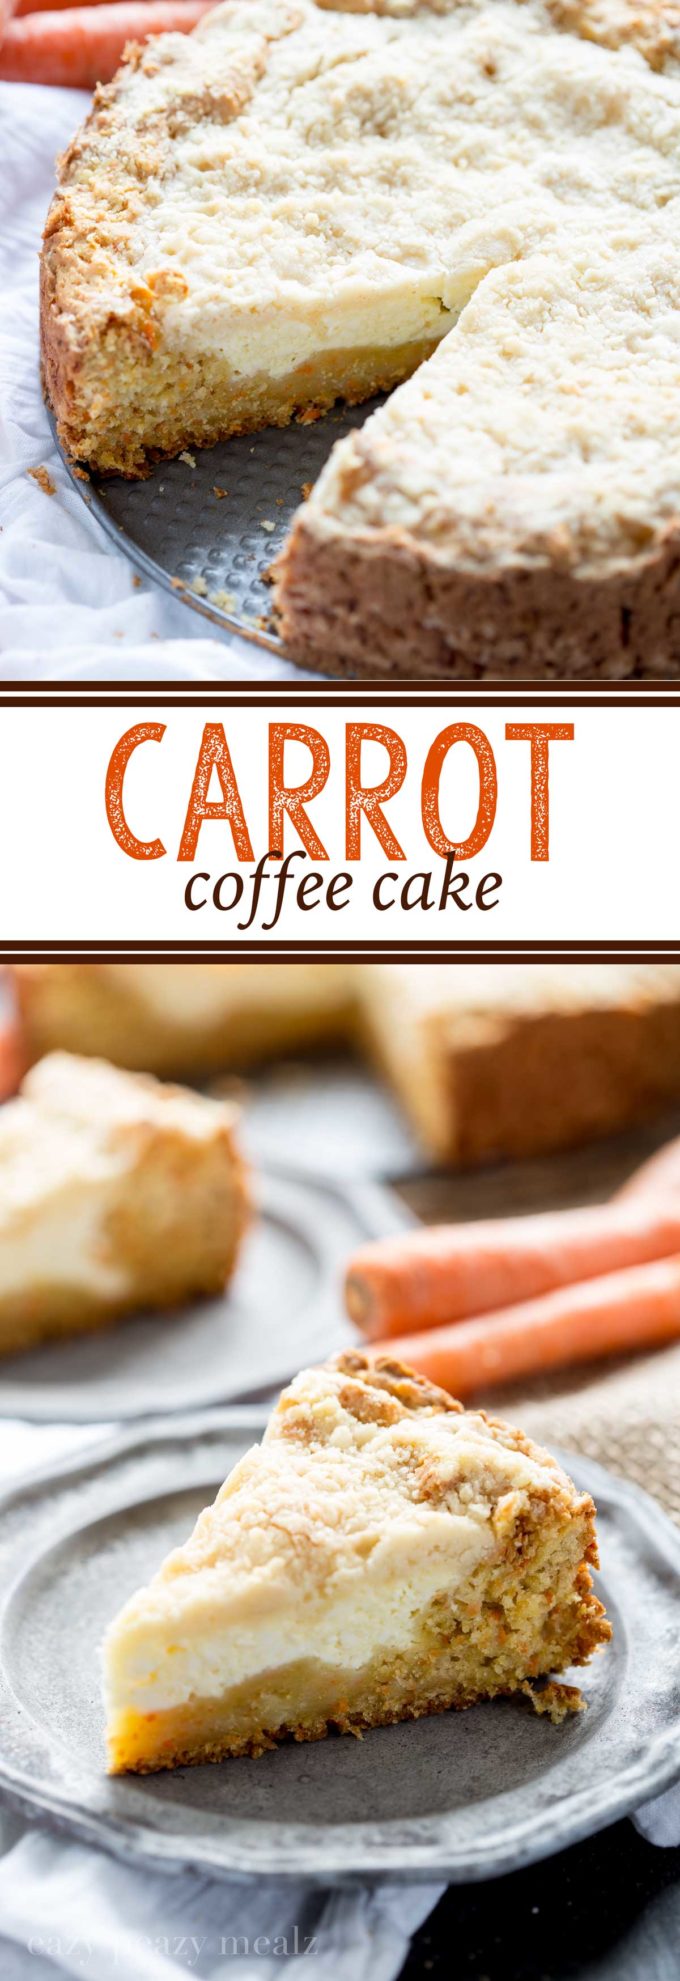 Carrot cake base, cream cheese filling, and a crumb topping, a fabulous treat or breakfast 